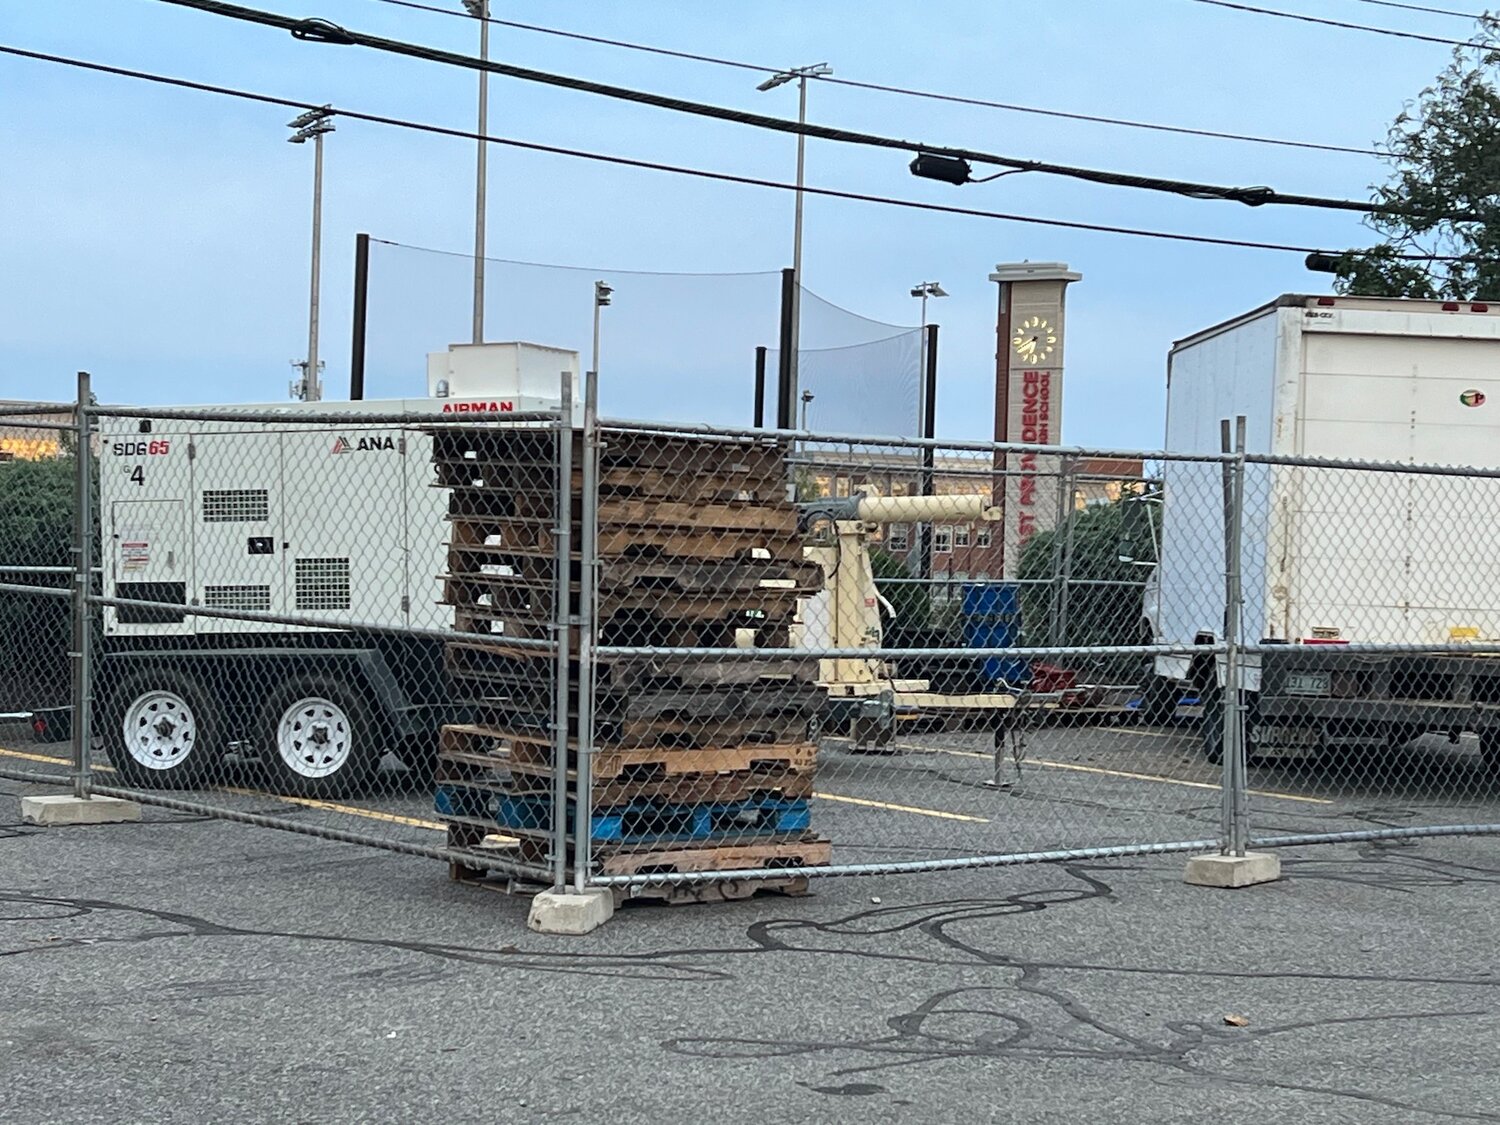 Contractors for the Pawtucket Avenue water pipe replacement project are using the corner lot across from EPHS as the staging area.